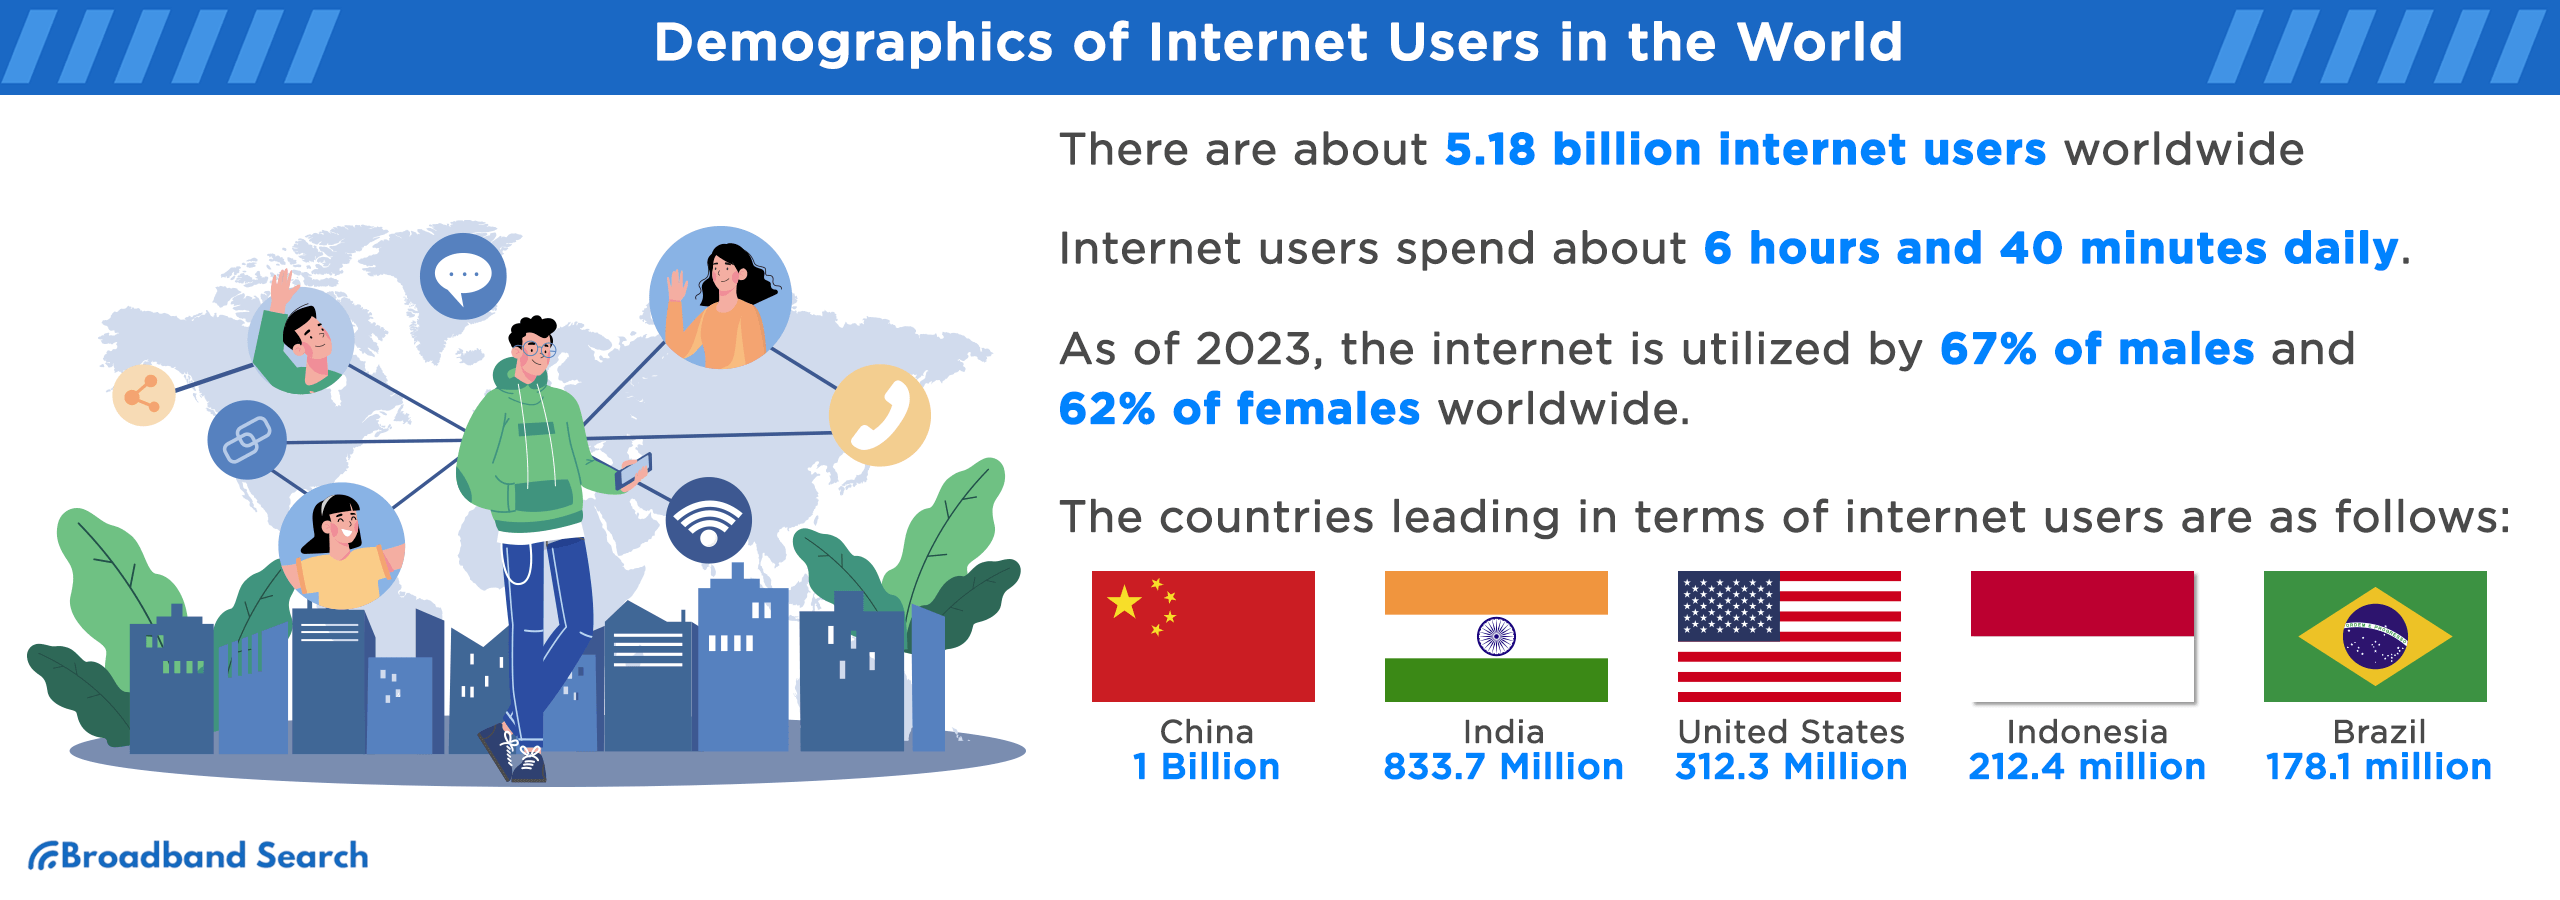 Demographics of Internet Users in the world